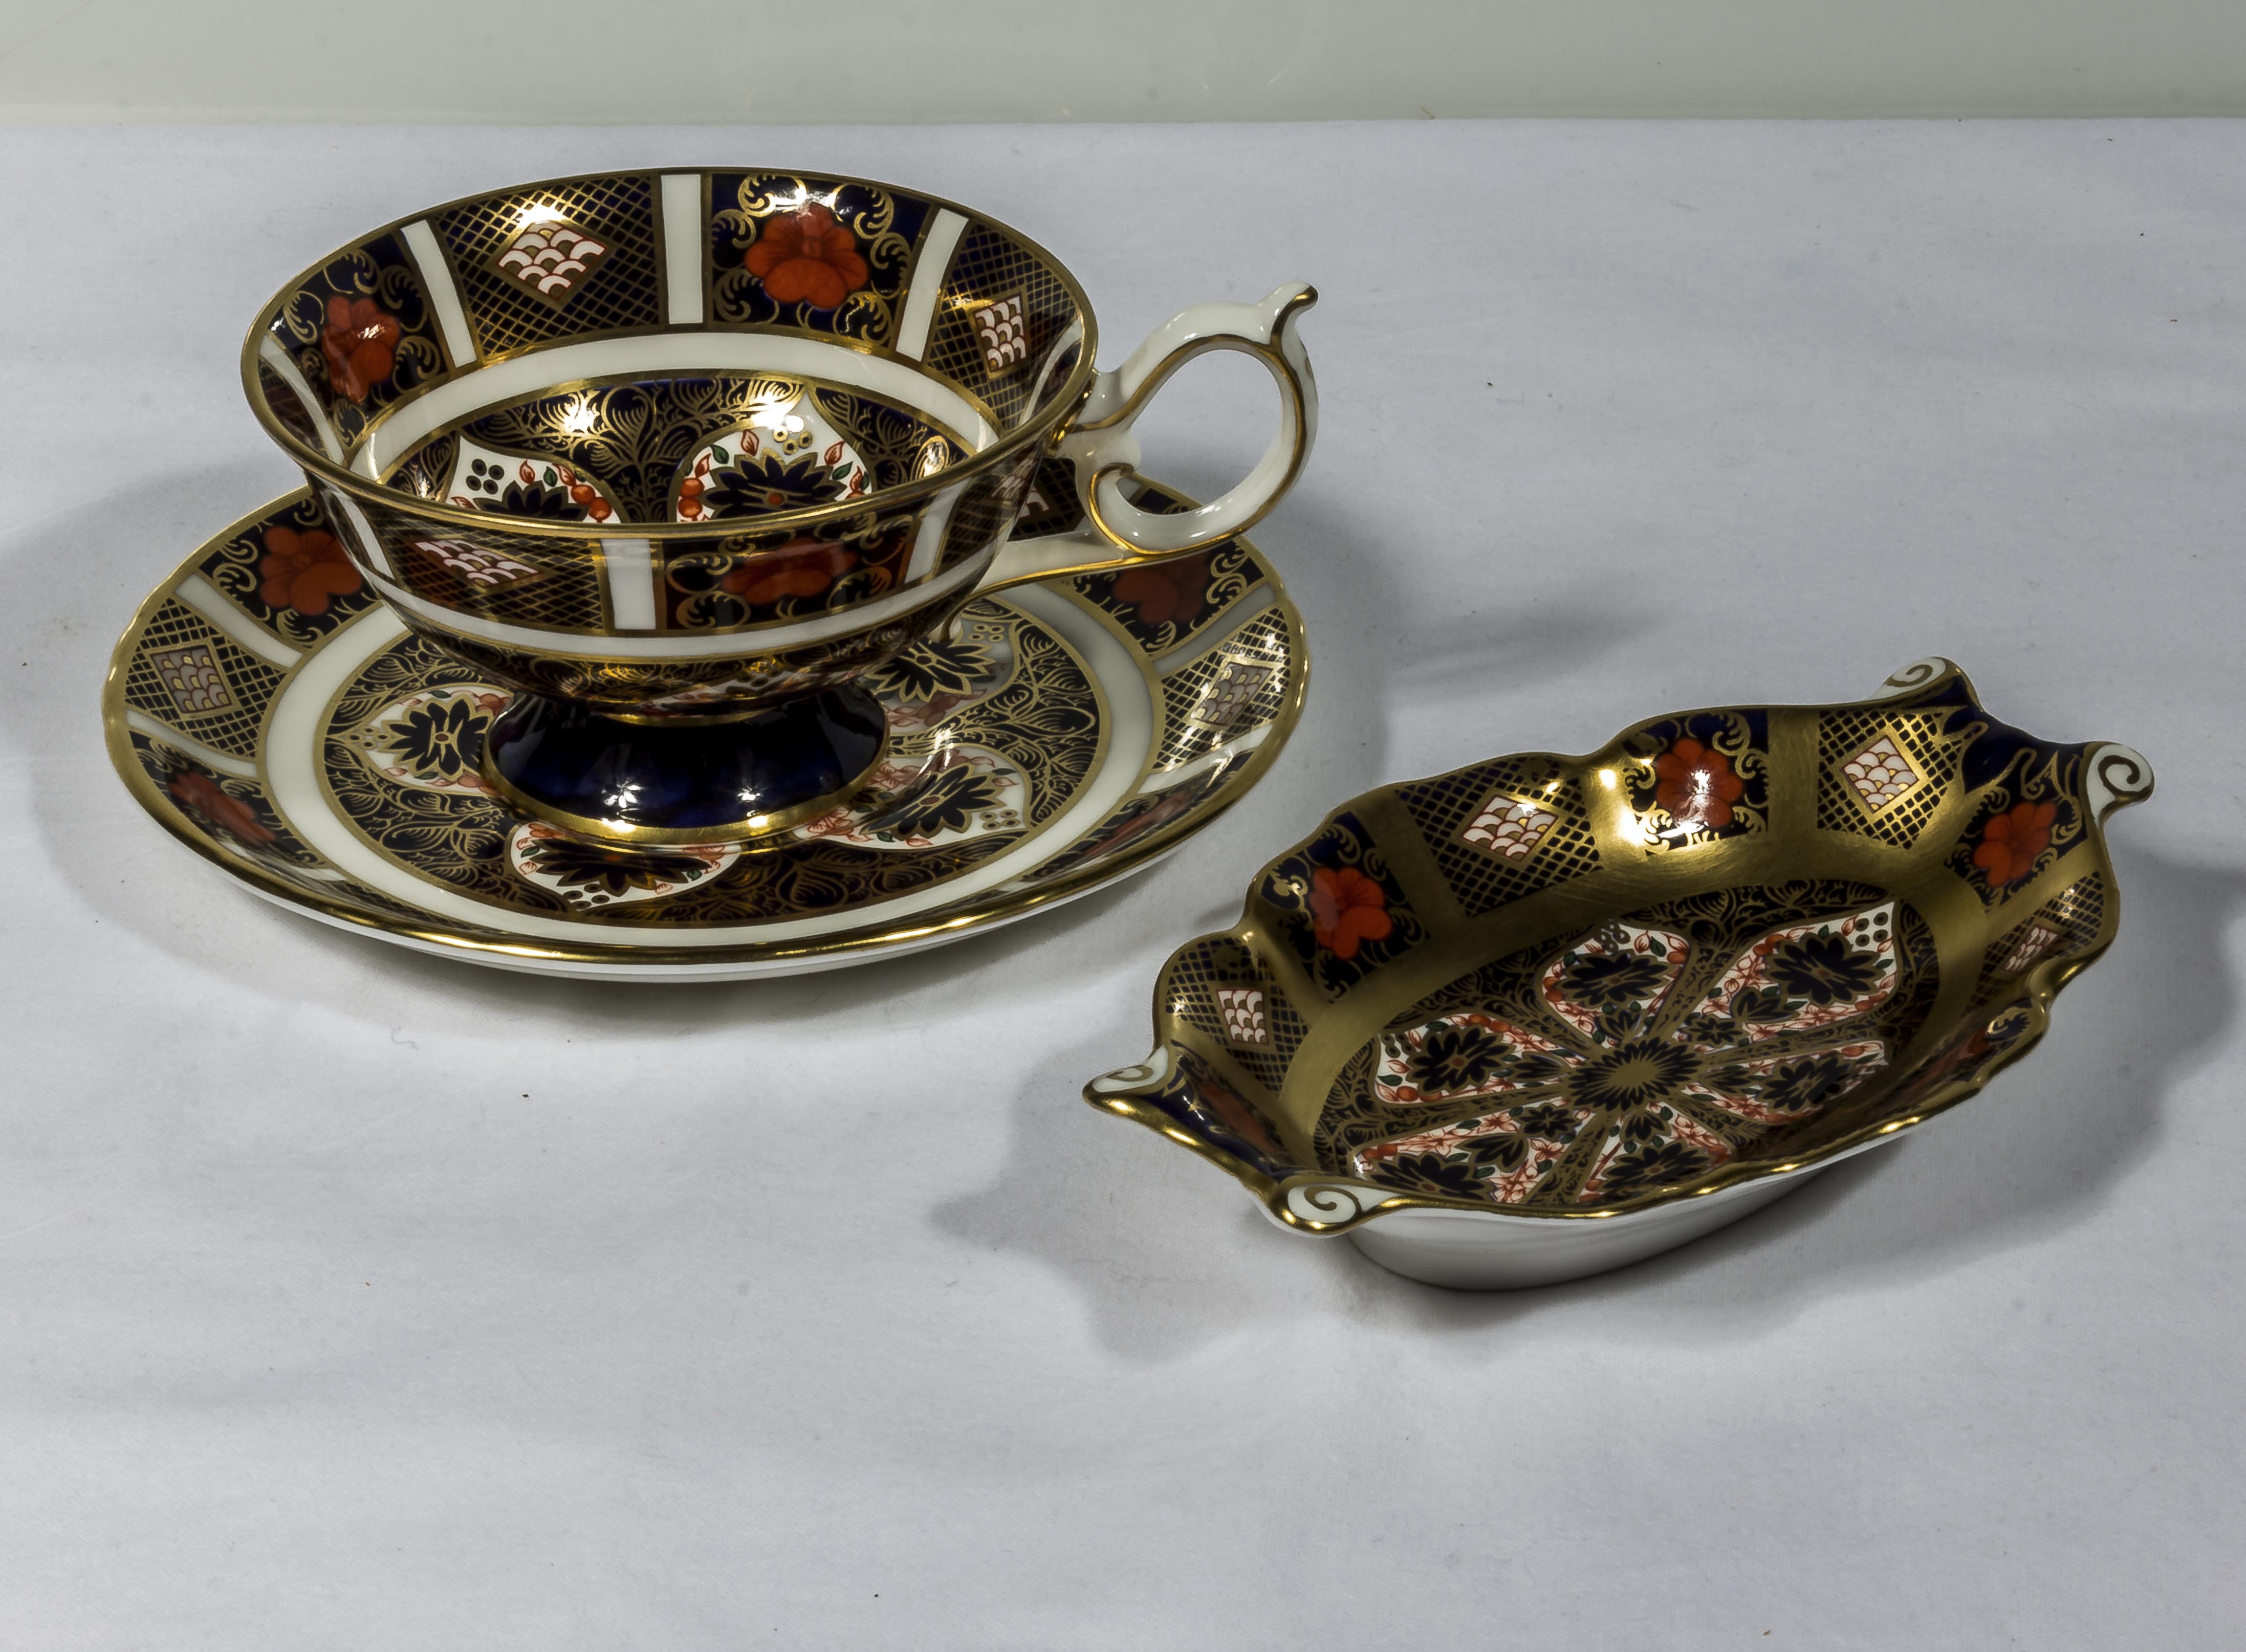 A Royal Crown Derby teacup and saucer together with a pin tray